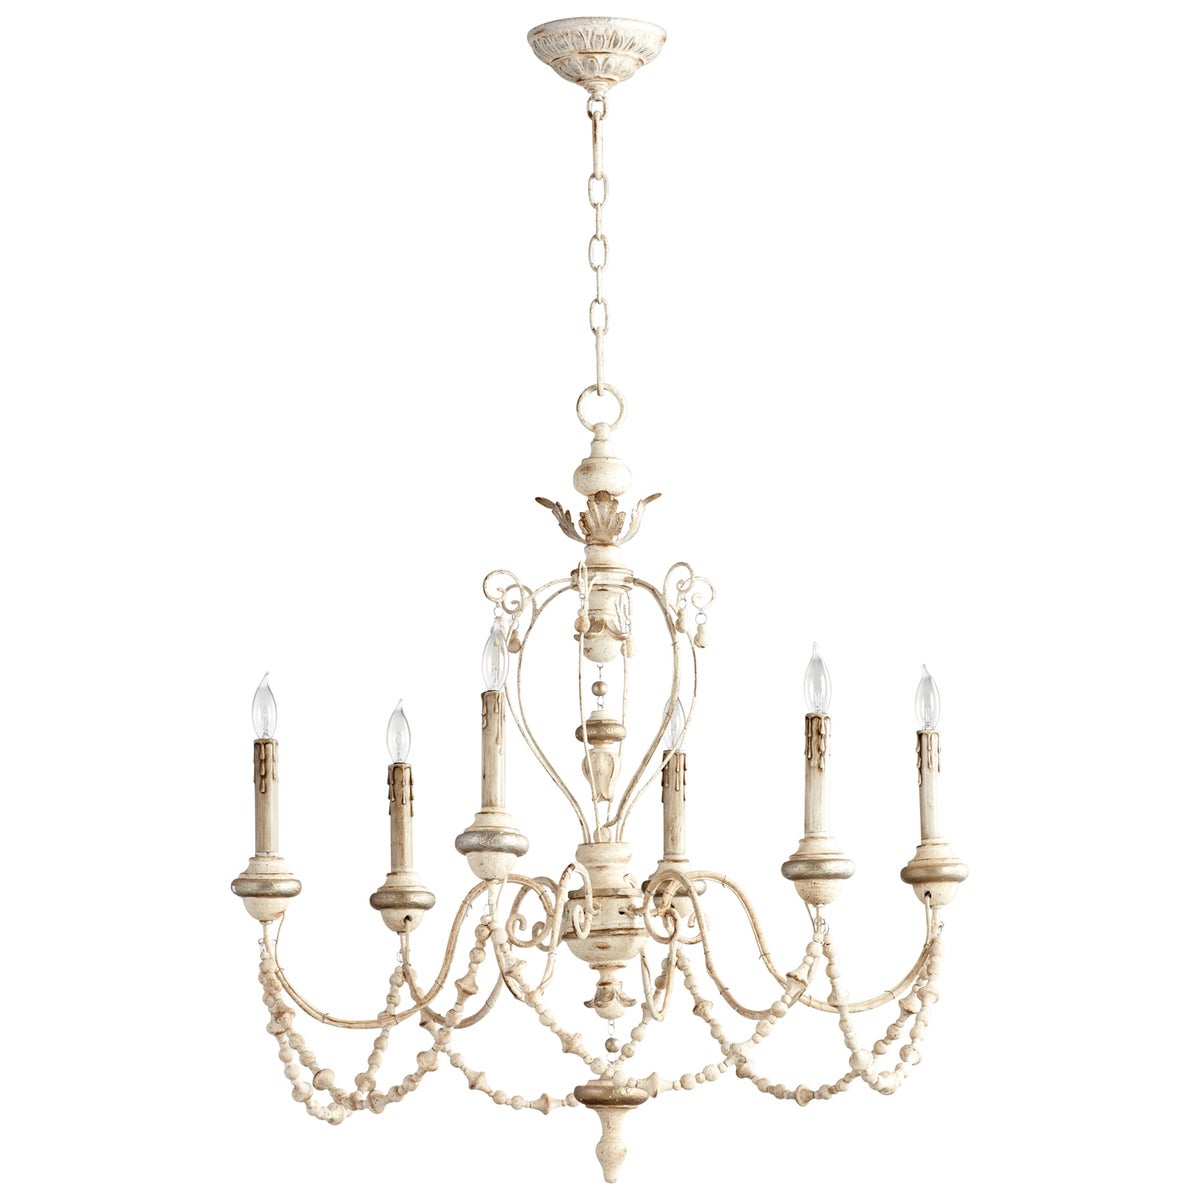 Persian White And Mystic Silver Florine Chandelier 6-Light